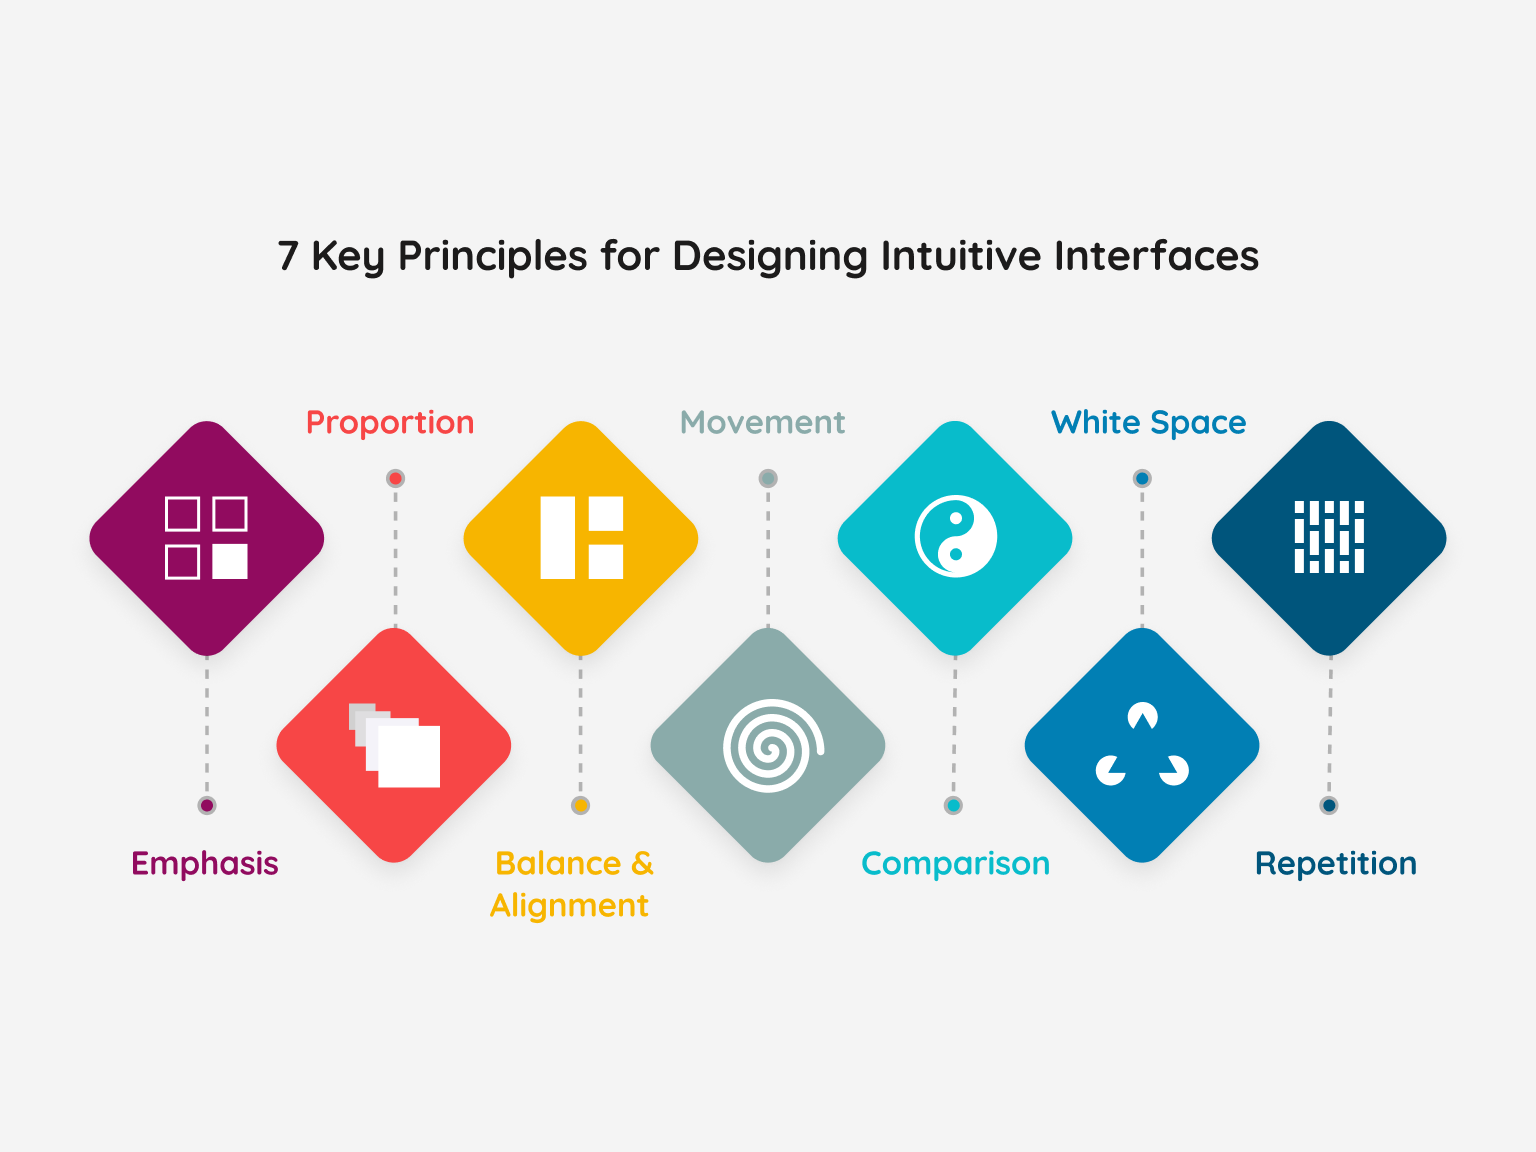 7 Key Principles for Designing Intuitive Interfaces